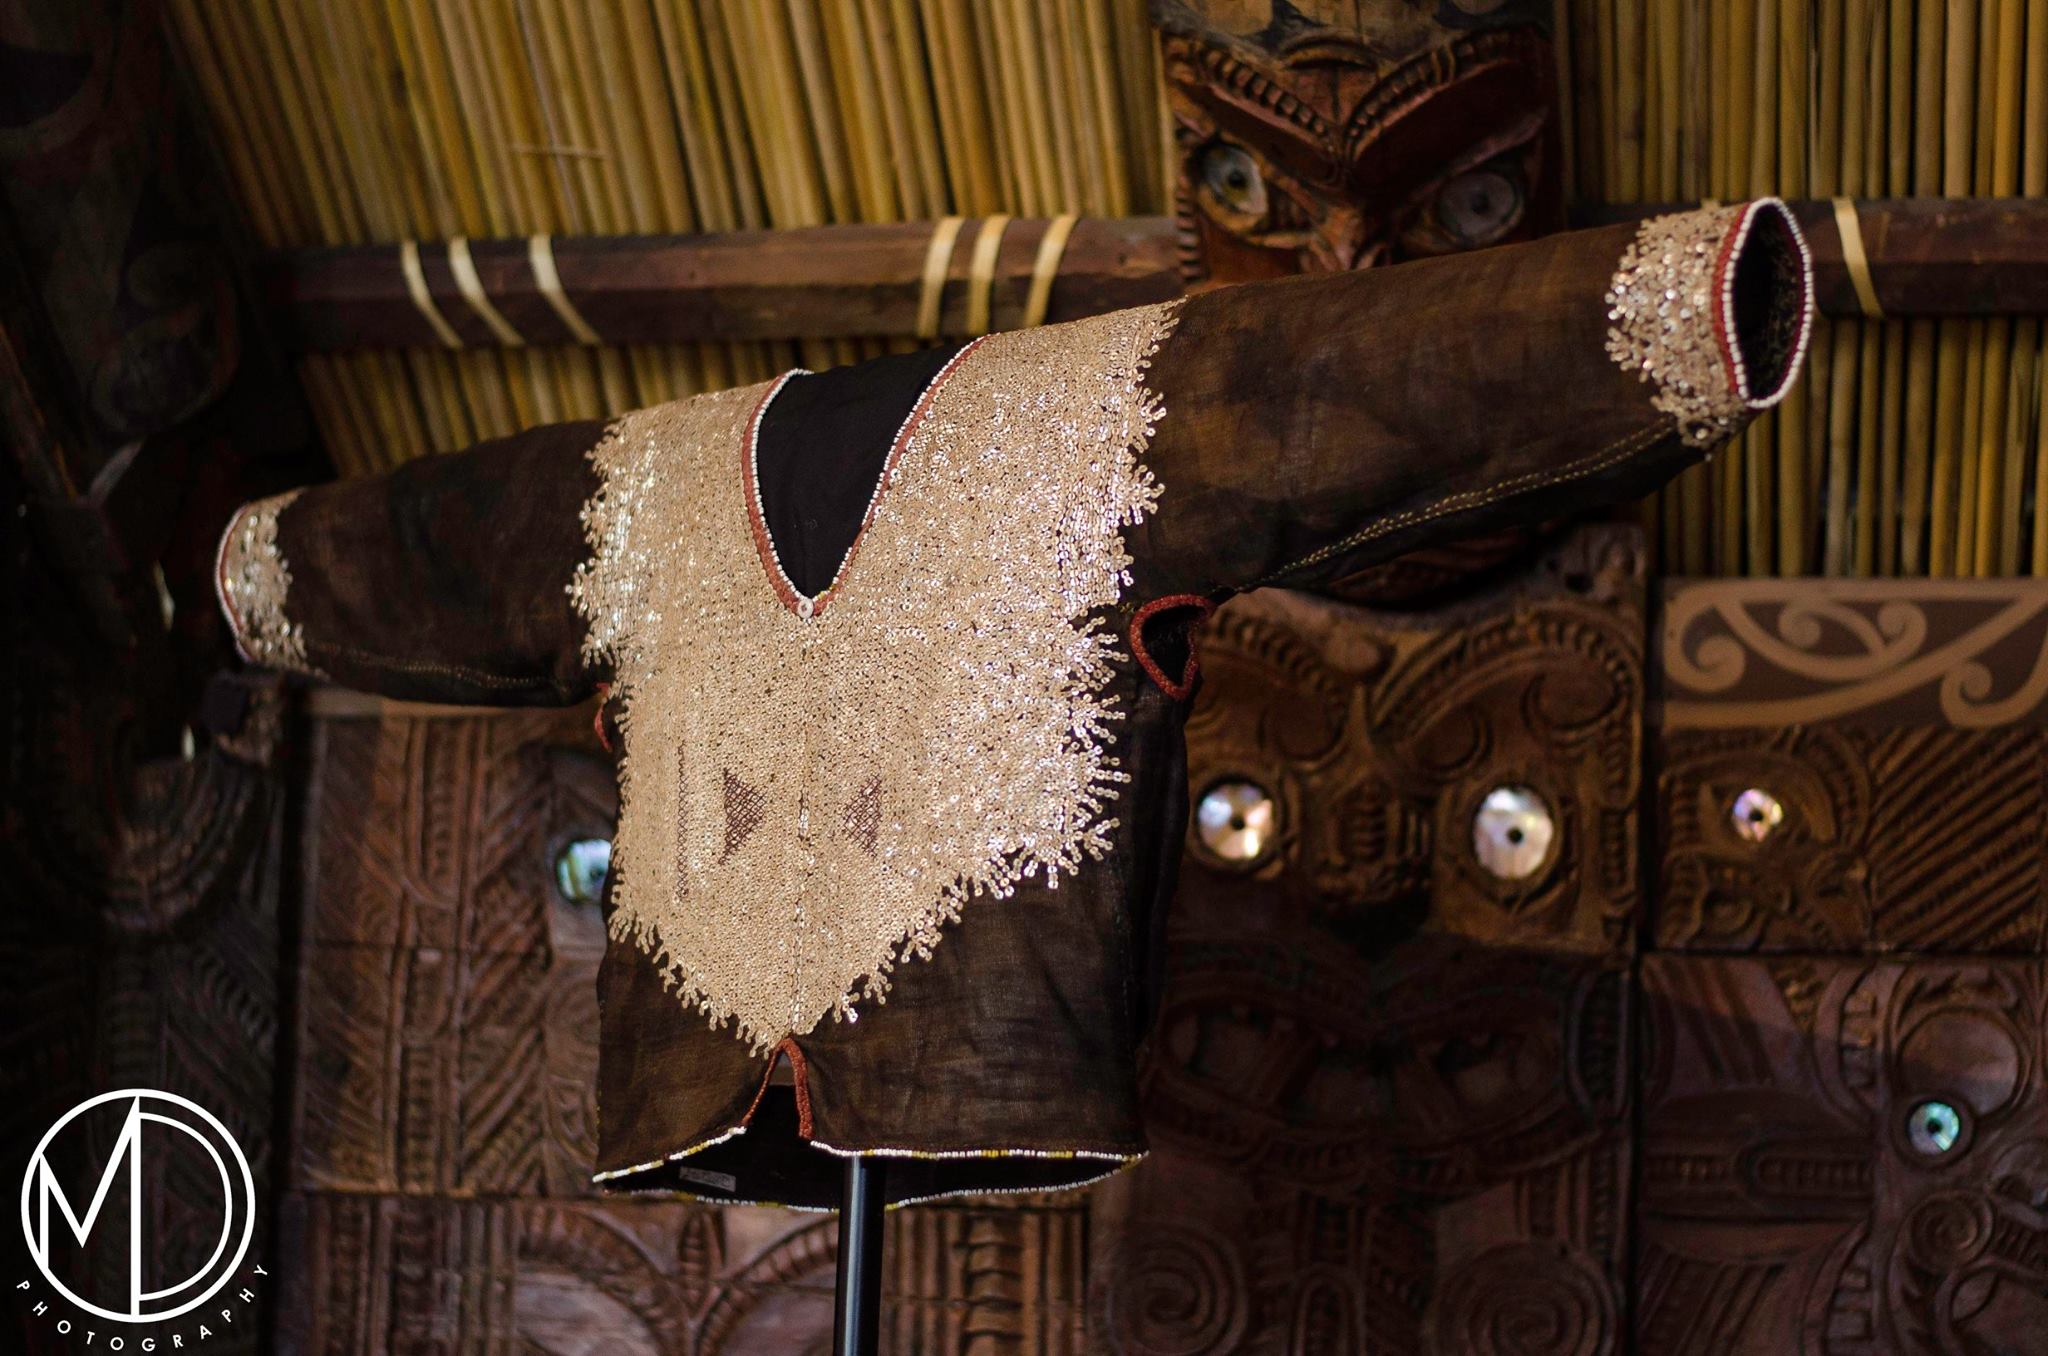 Close up of Bagobo shirt displayed on the artifacts table. (c) Field Museum of Natural History - CC BY-NC 4.0